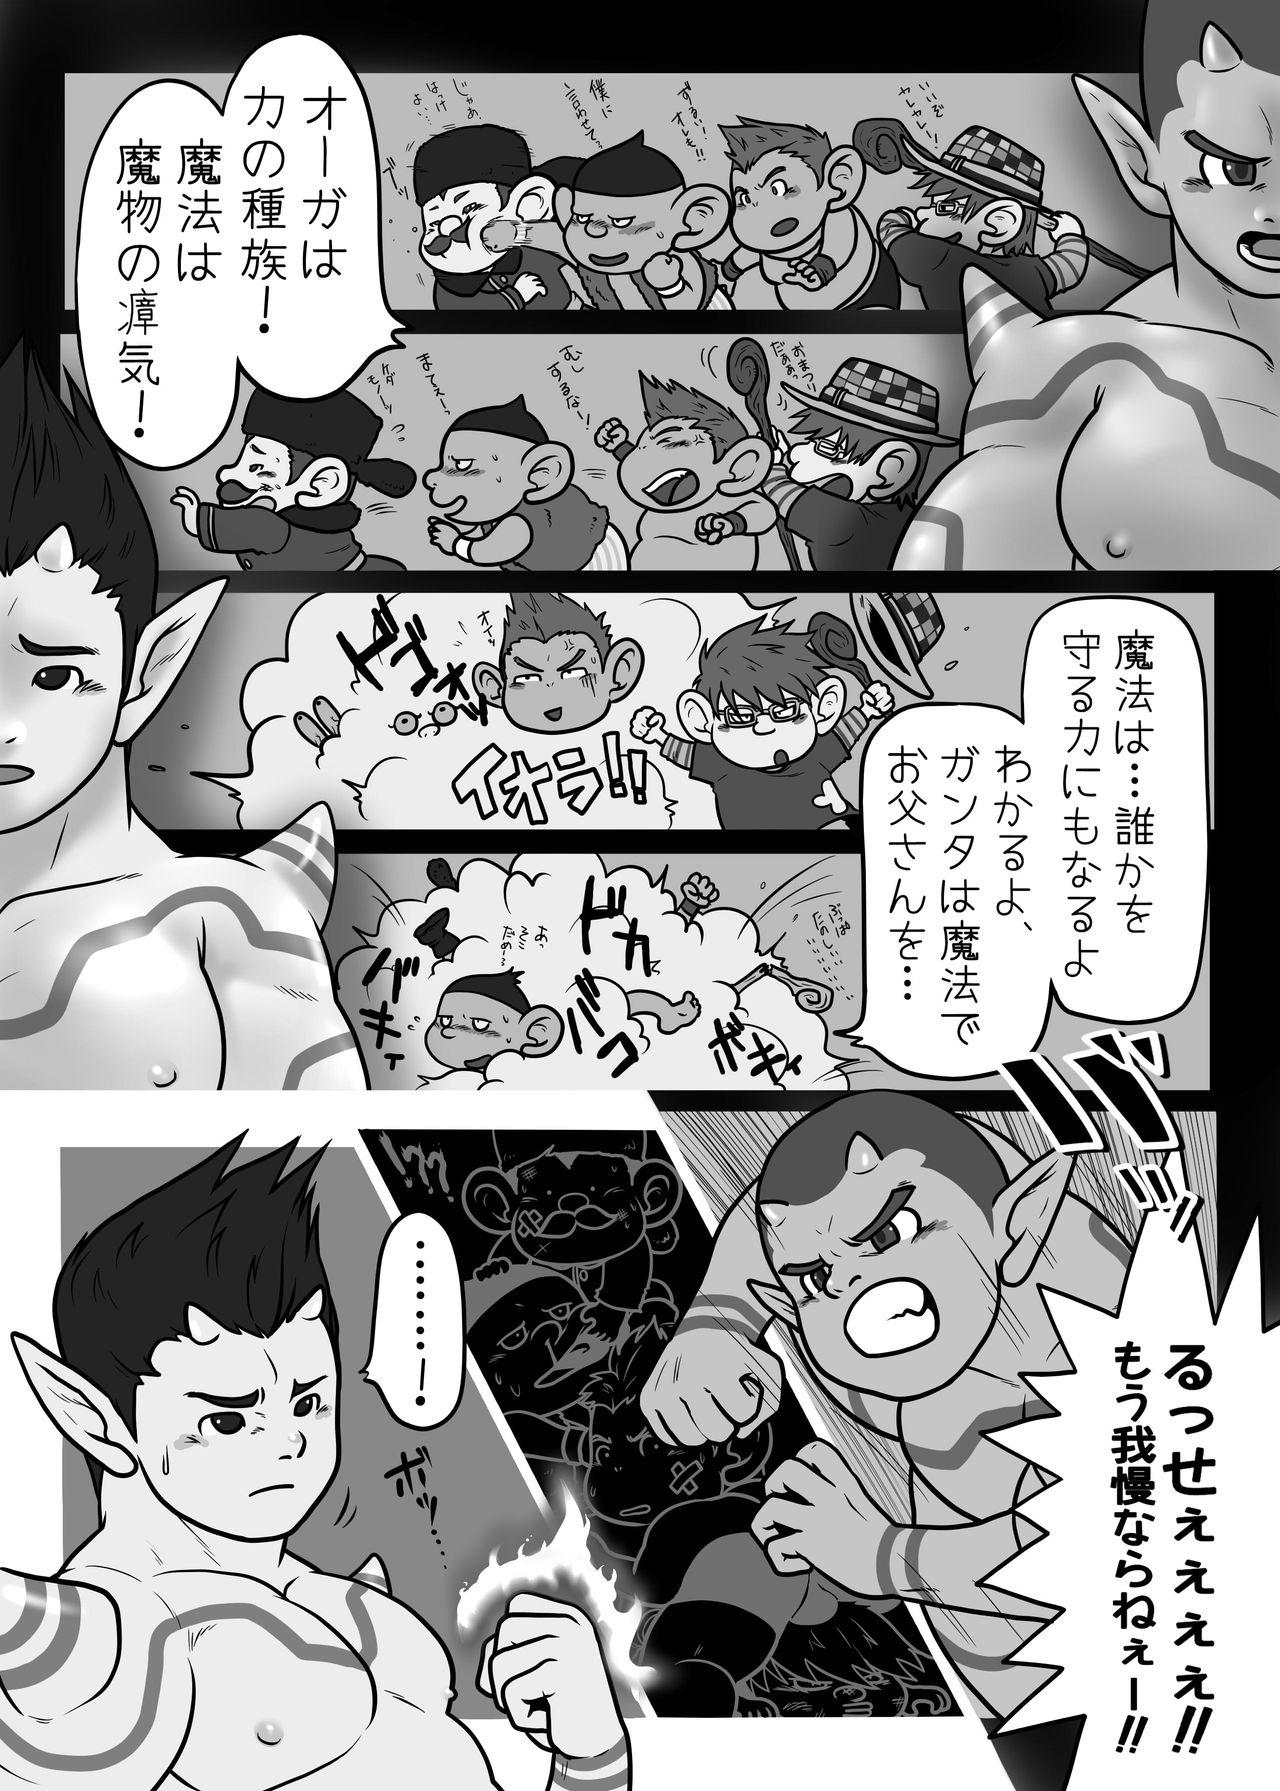 Shemale Sex Ogre to Dwa +Prologue & Epilogue - Dragon quest x Jerking Off - Page 4